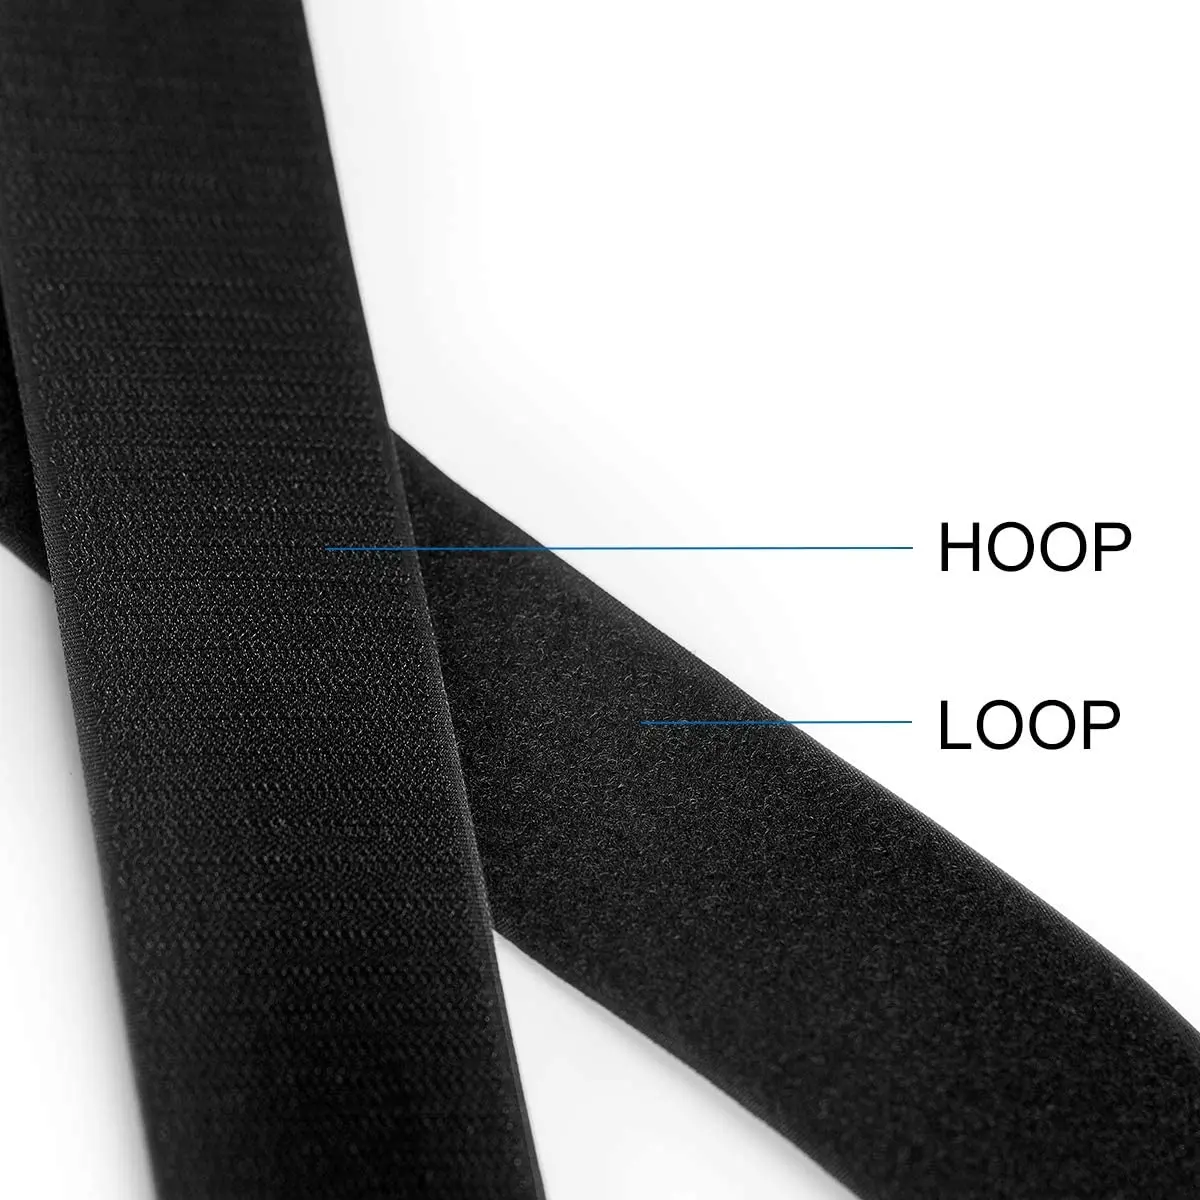 5M Black and White Non-Adhesive Hook and Loop Fasteners Strong Tape Nylon Fabric Magic Tape for DIY Sewing Accessories 16mm-150